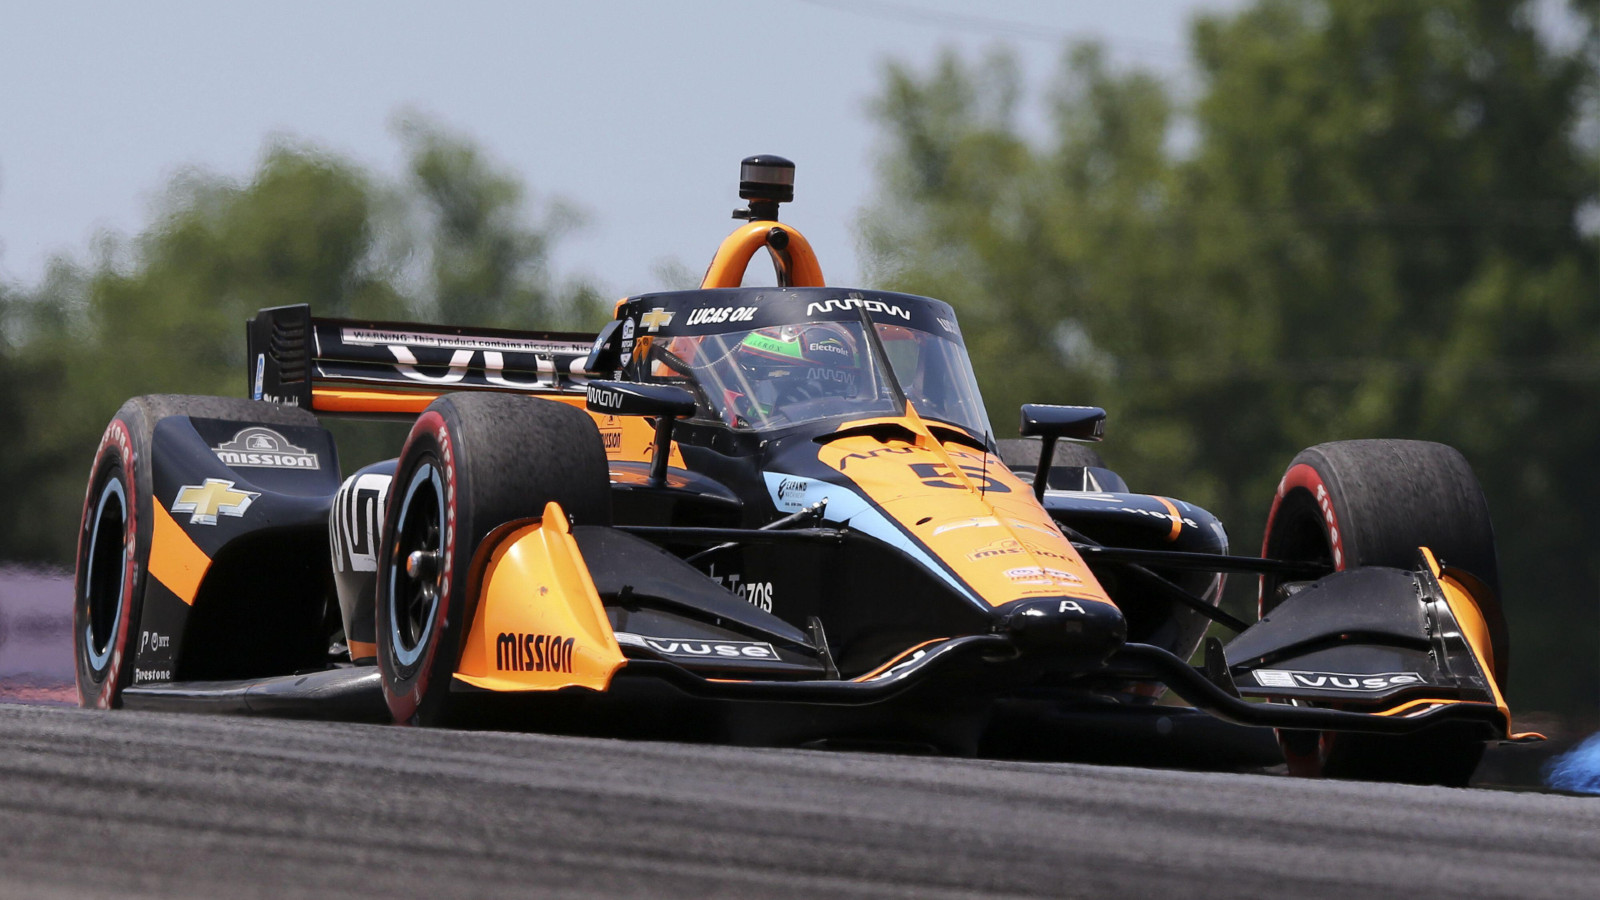 McLaren's Pato O'Ward on track during the 2022 IndyCar season.